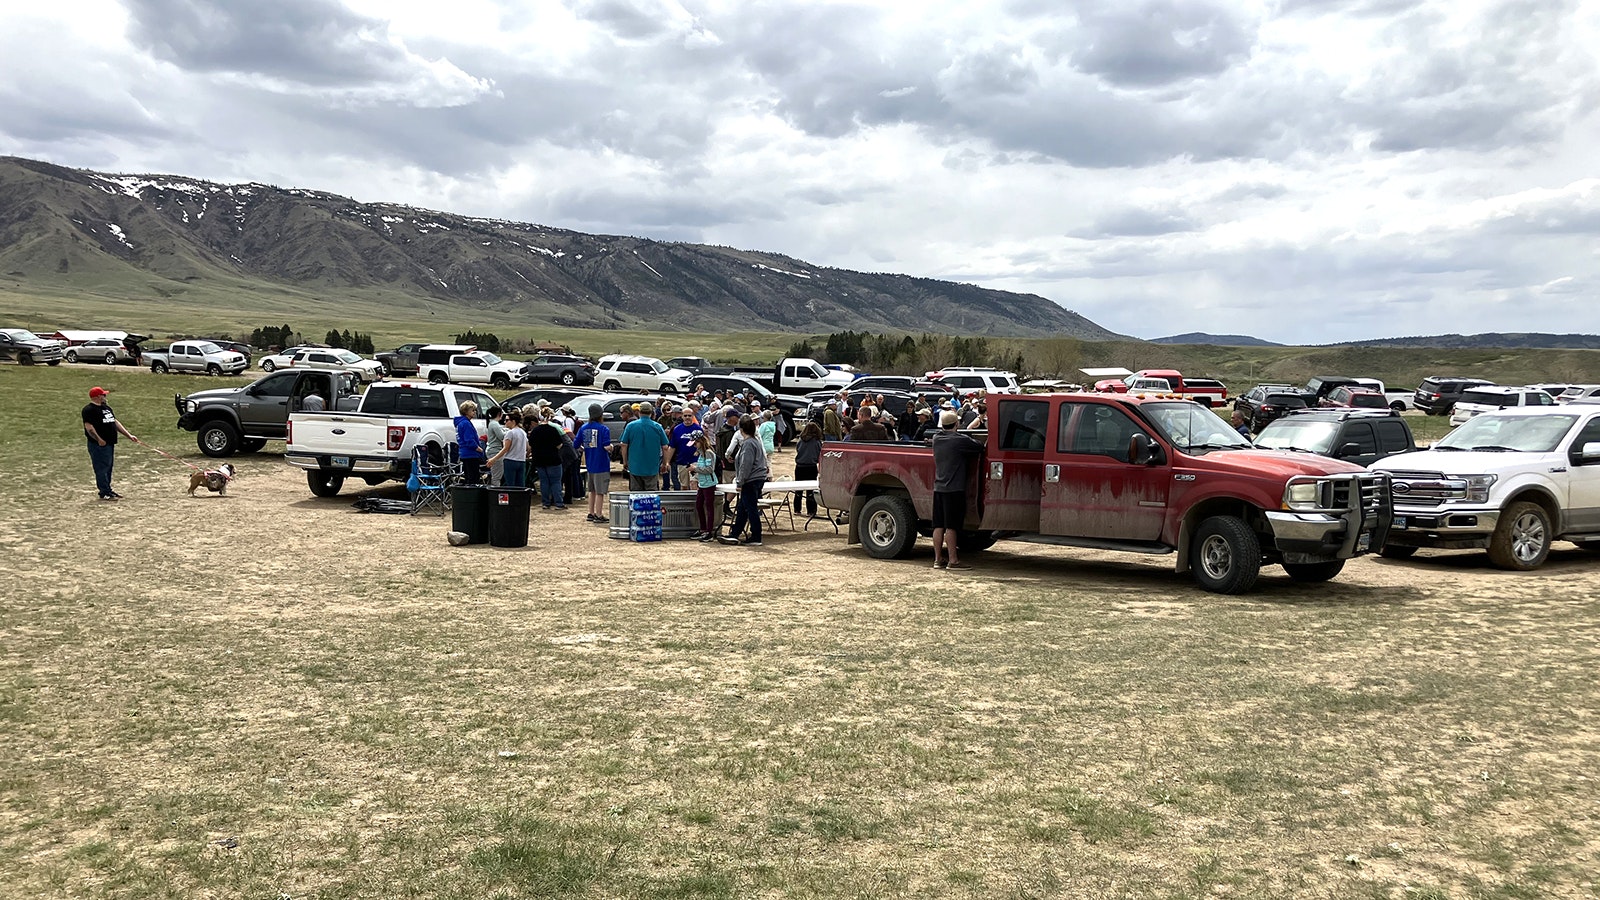 About  100 people gathered on a Sunday afternoon to walk through Section 36 of state land leased by Prism Logistics for potential gravel mining. The section is non-motorized as is called the School Section.